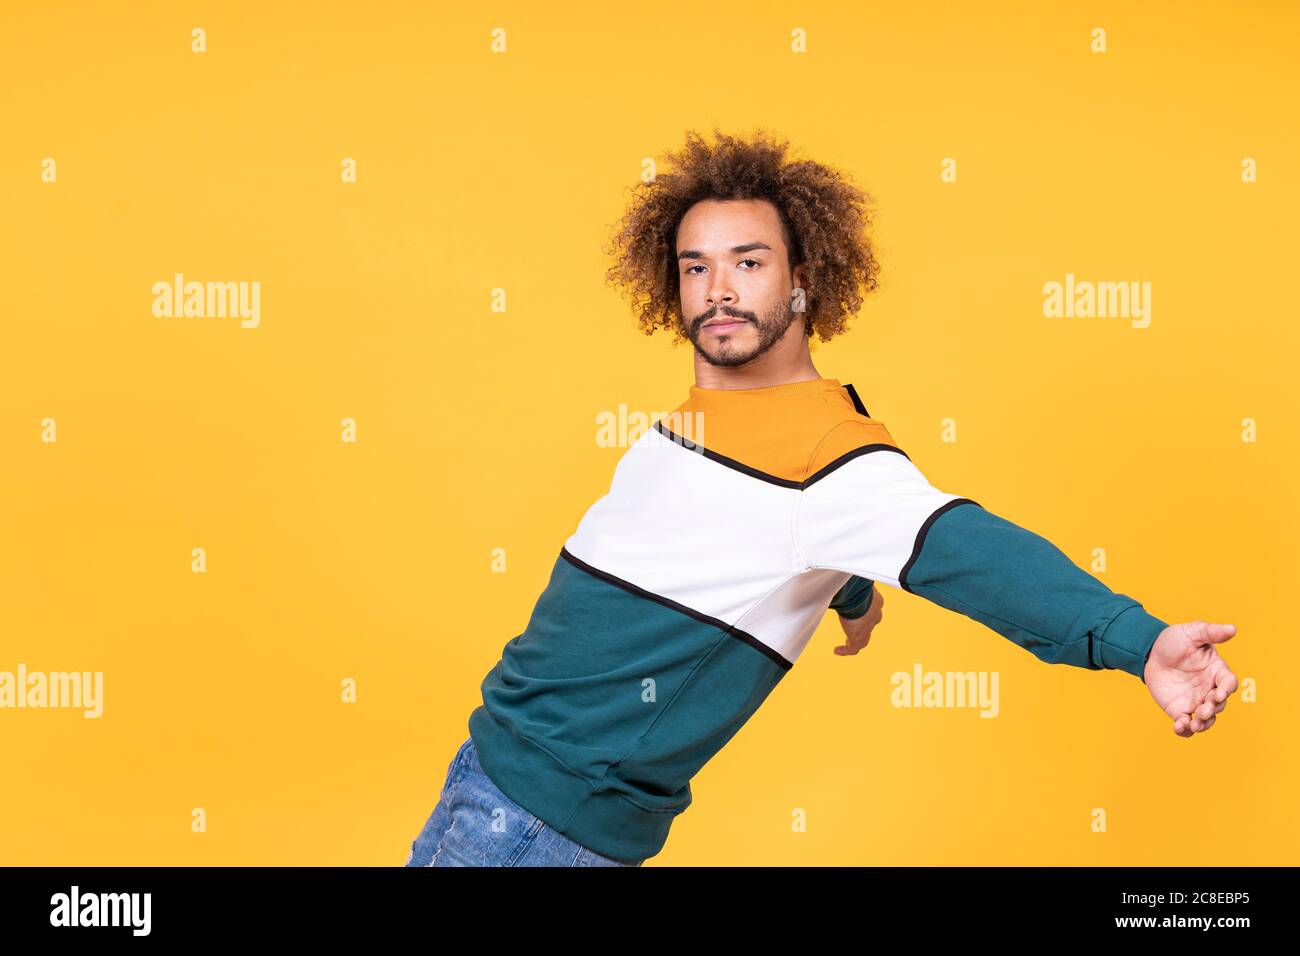 Cool young man with curly hair dancing against yellow background Stock Photo